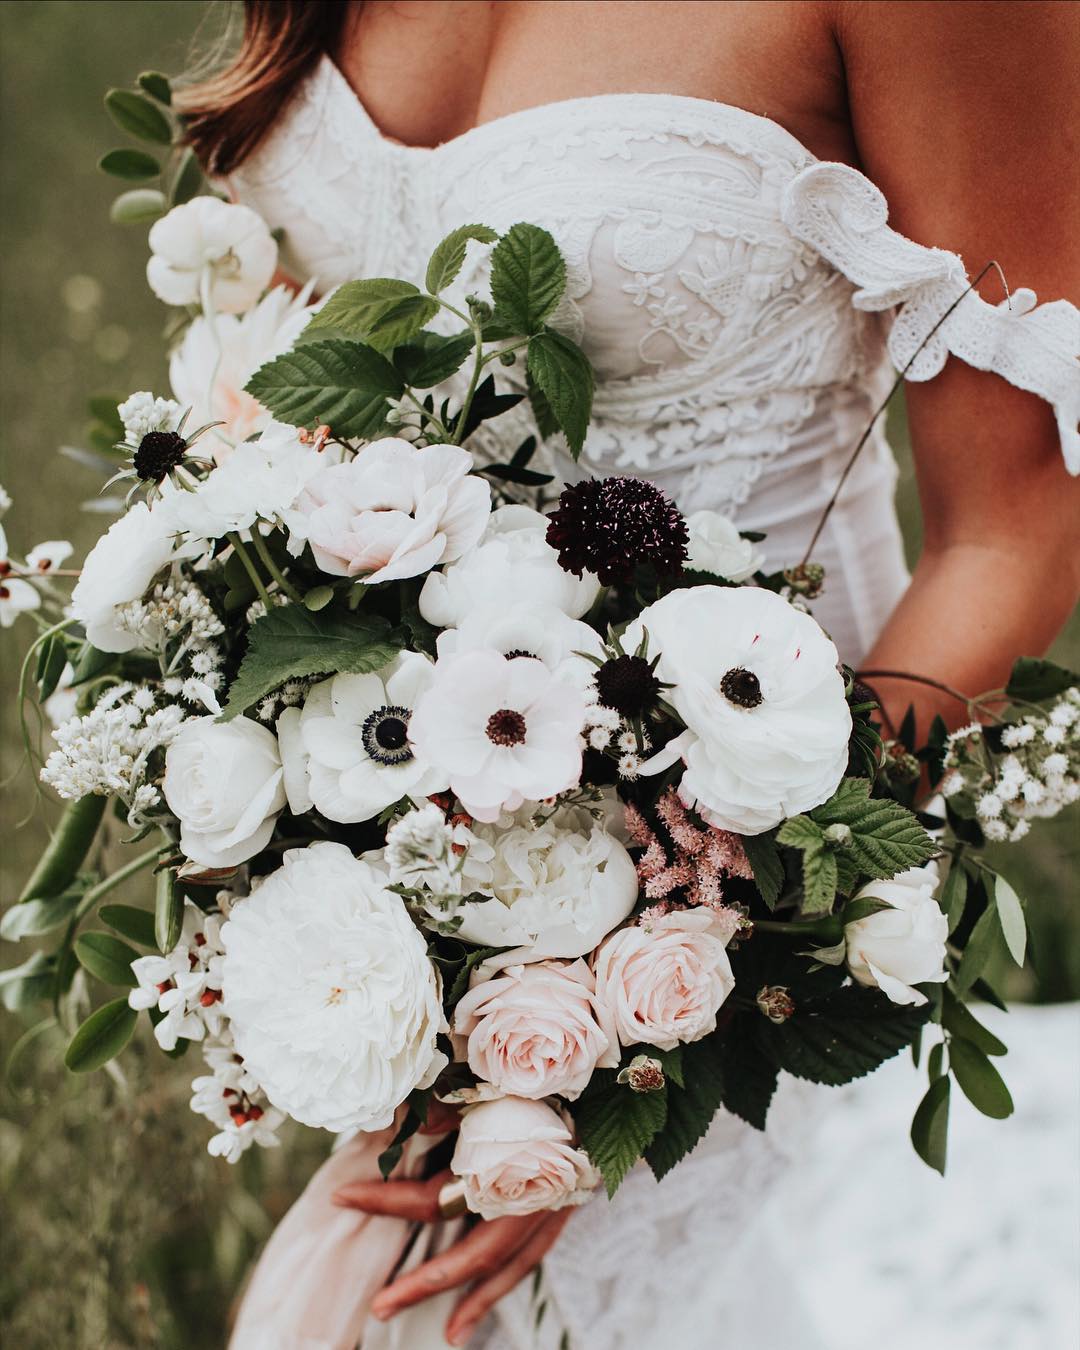 Bride Holding a Beautiful Boquet of Flowers on Wedding Day. Photo by Instagram user @thelittlealli